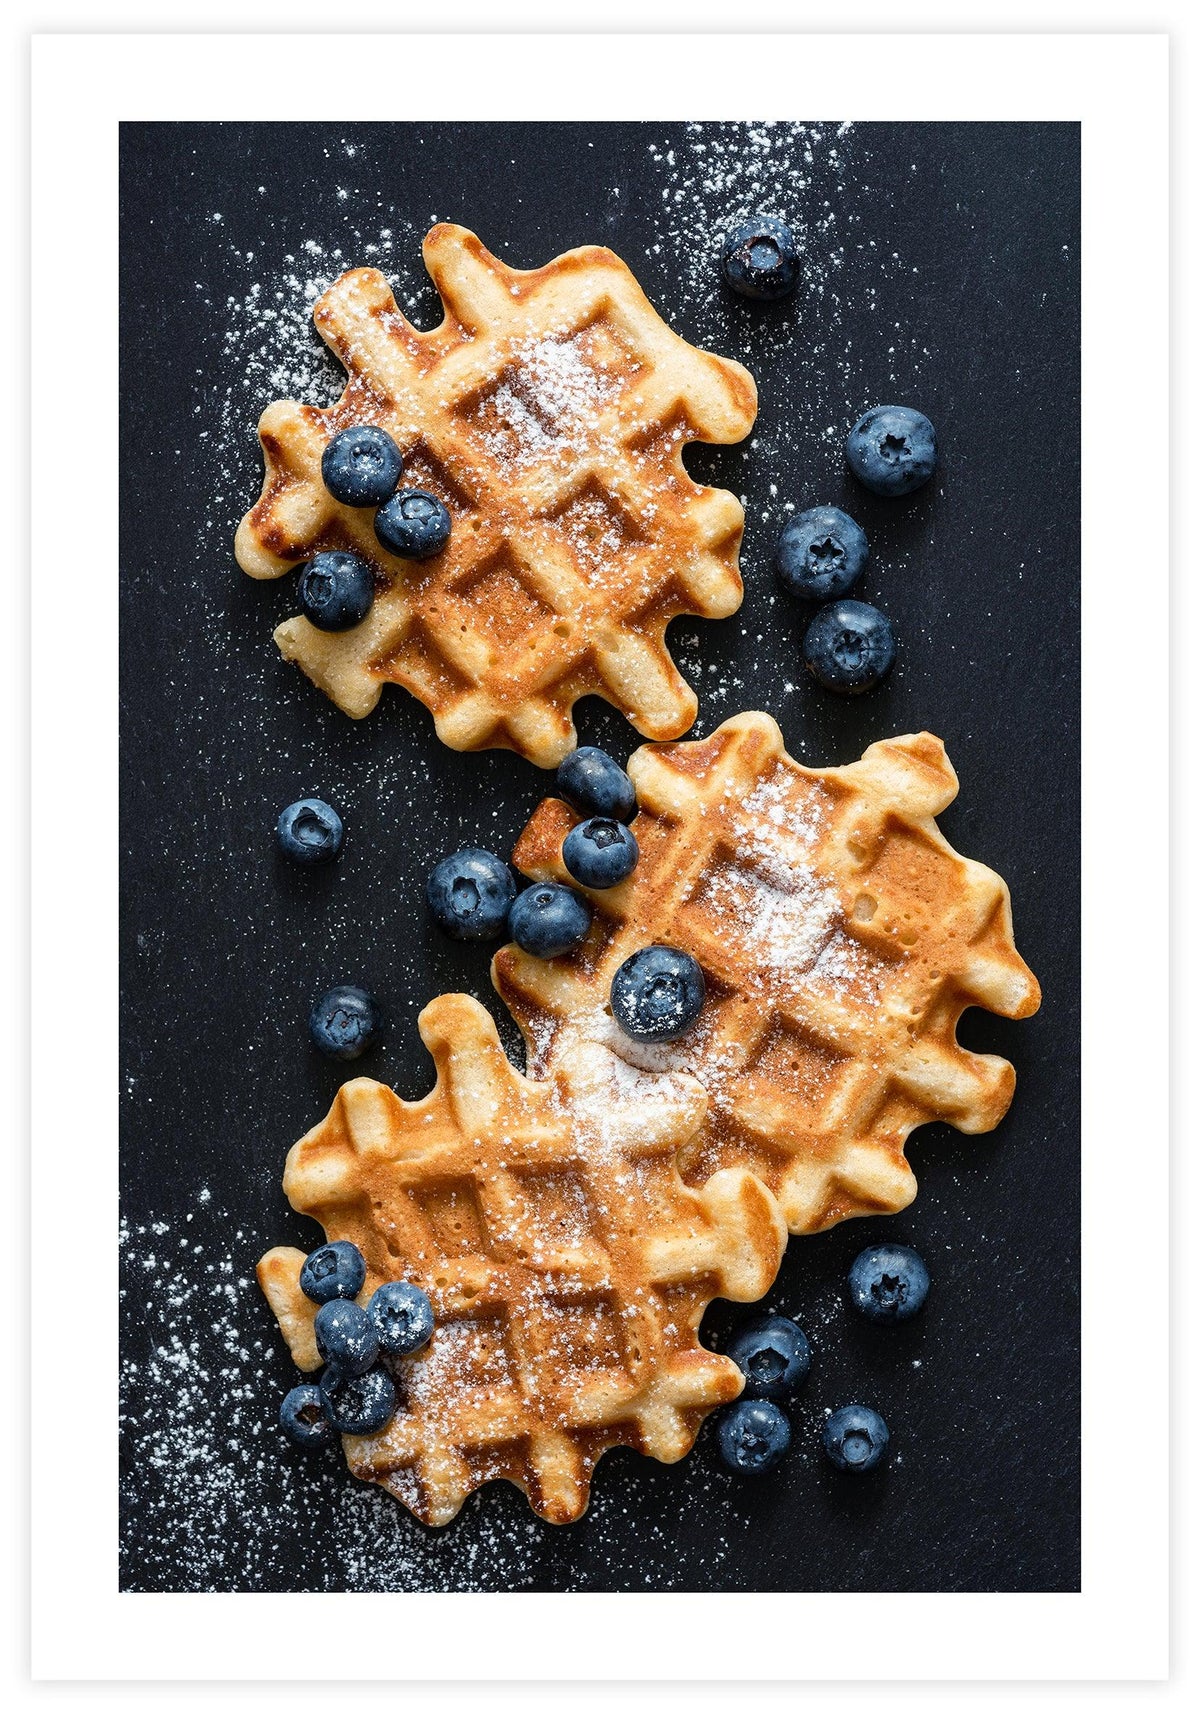 Waffles With Blueberries Poster - KAMAN